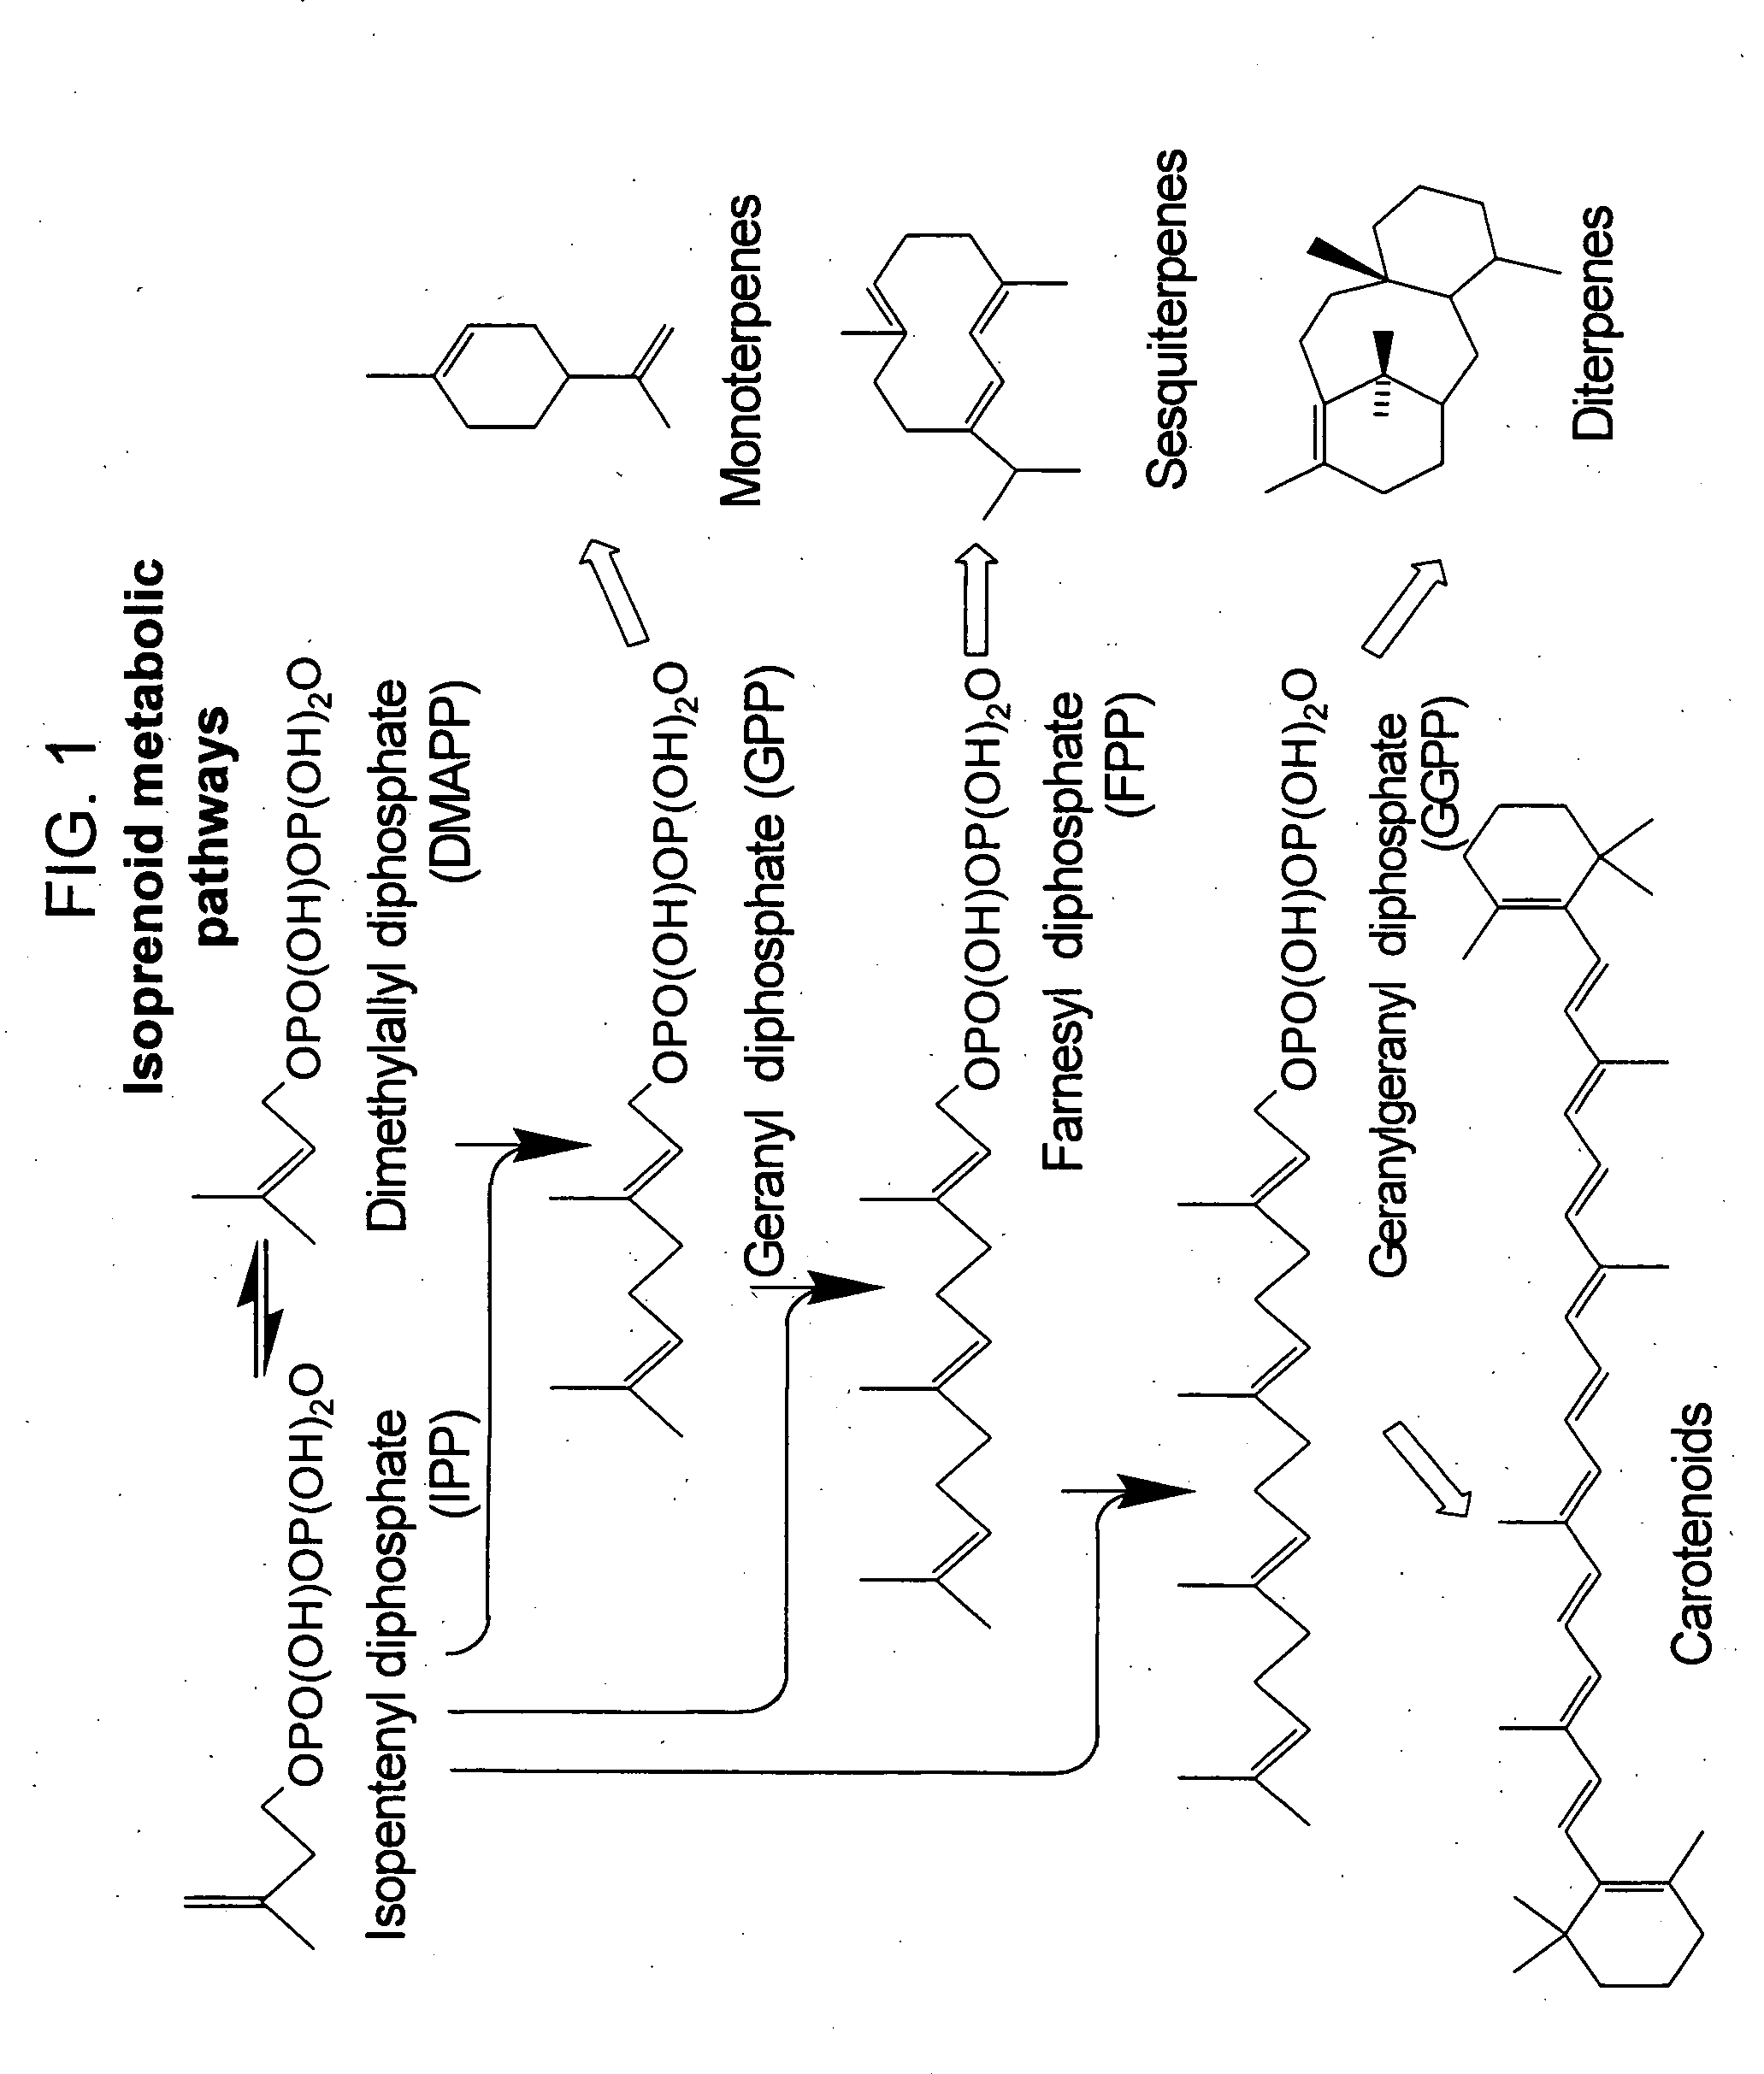 Method for enhancing production of isoprenoid compounds